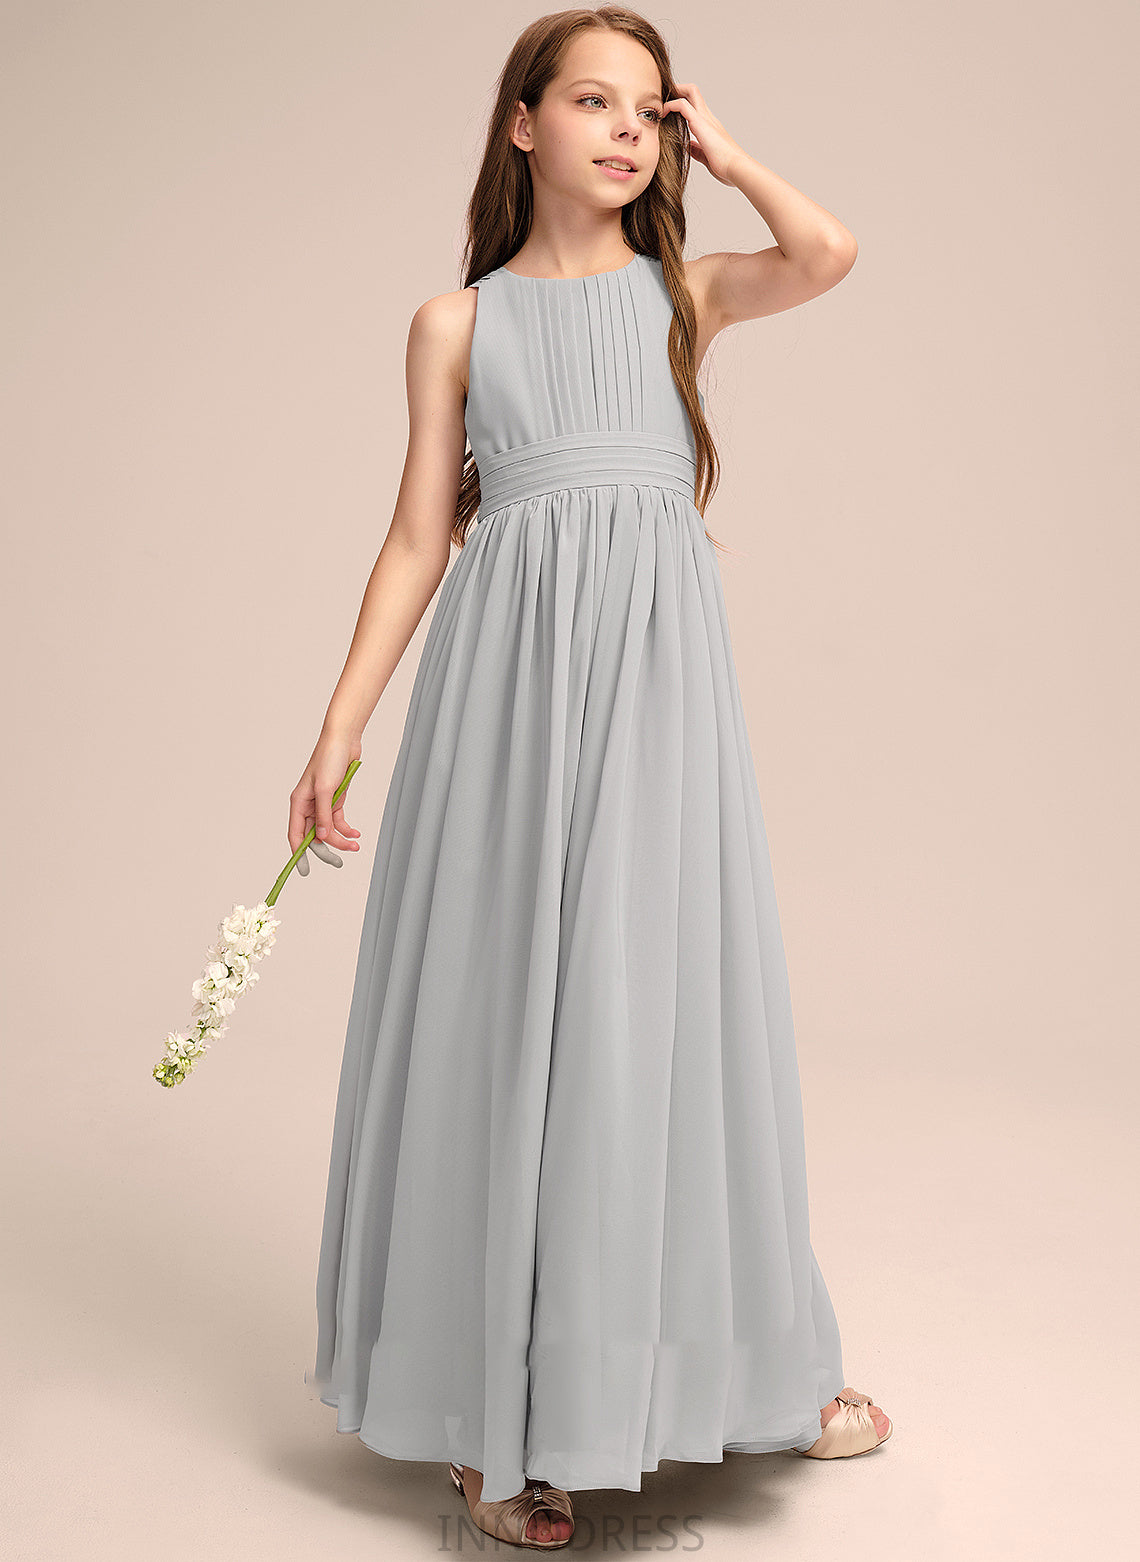 Alexis Junior Bridesmaid Dresses Floor-Length Scoop Bow(s) Chiffon Ruffle With Neck A-Line